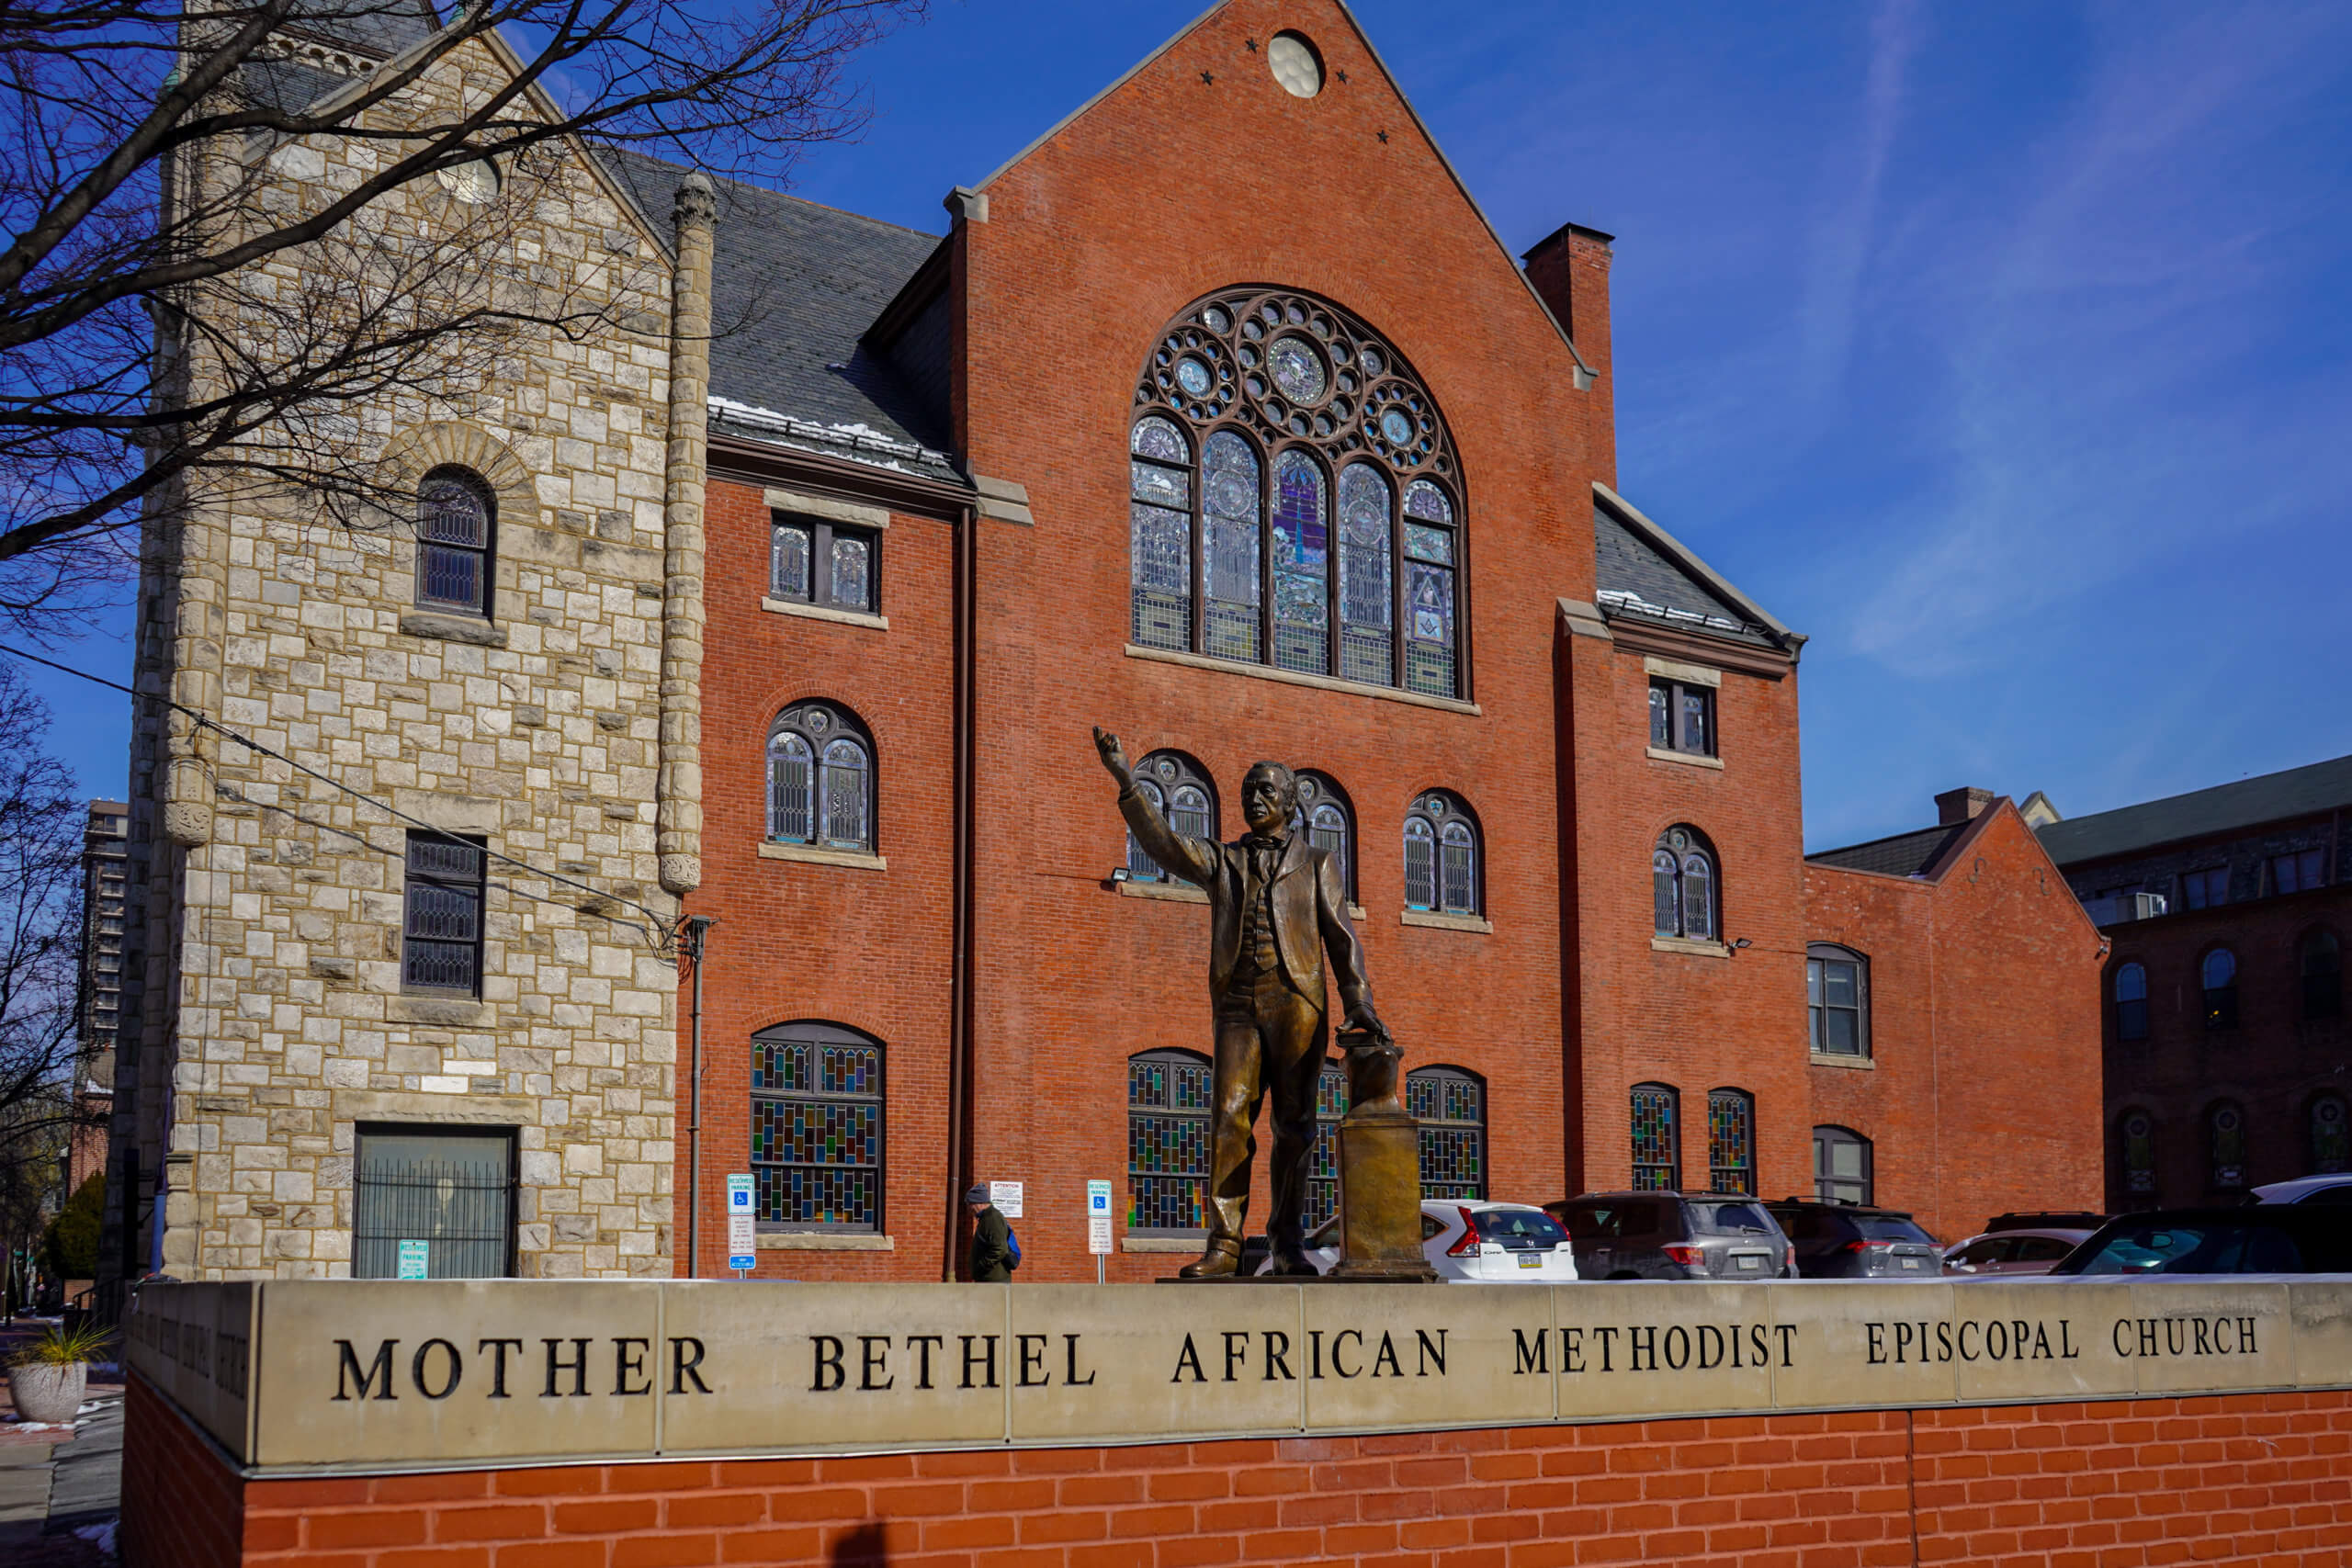 A brick wall in front of a brick building, a statue is in the middle. across the front reads Mother Bethel African Methodist Episcopal Church.